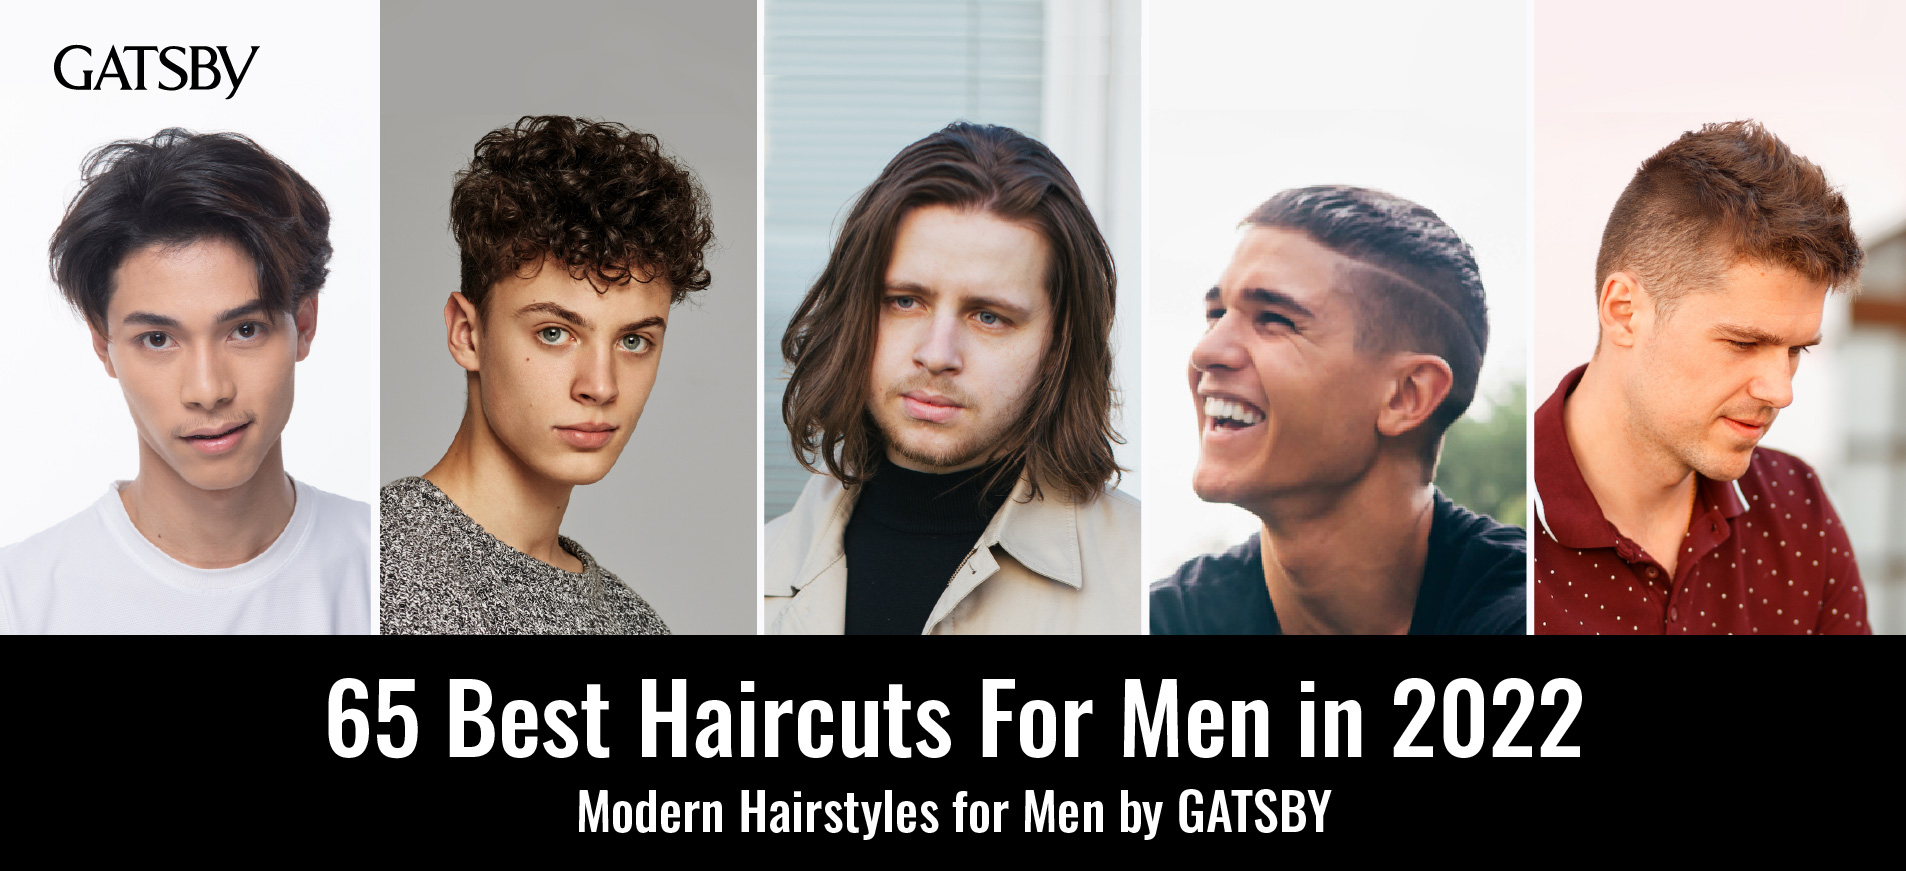 Quiff Haircuts - The Vogue Trends